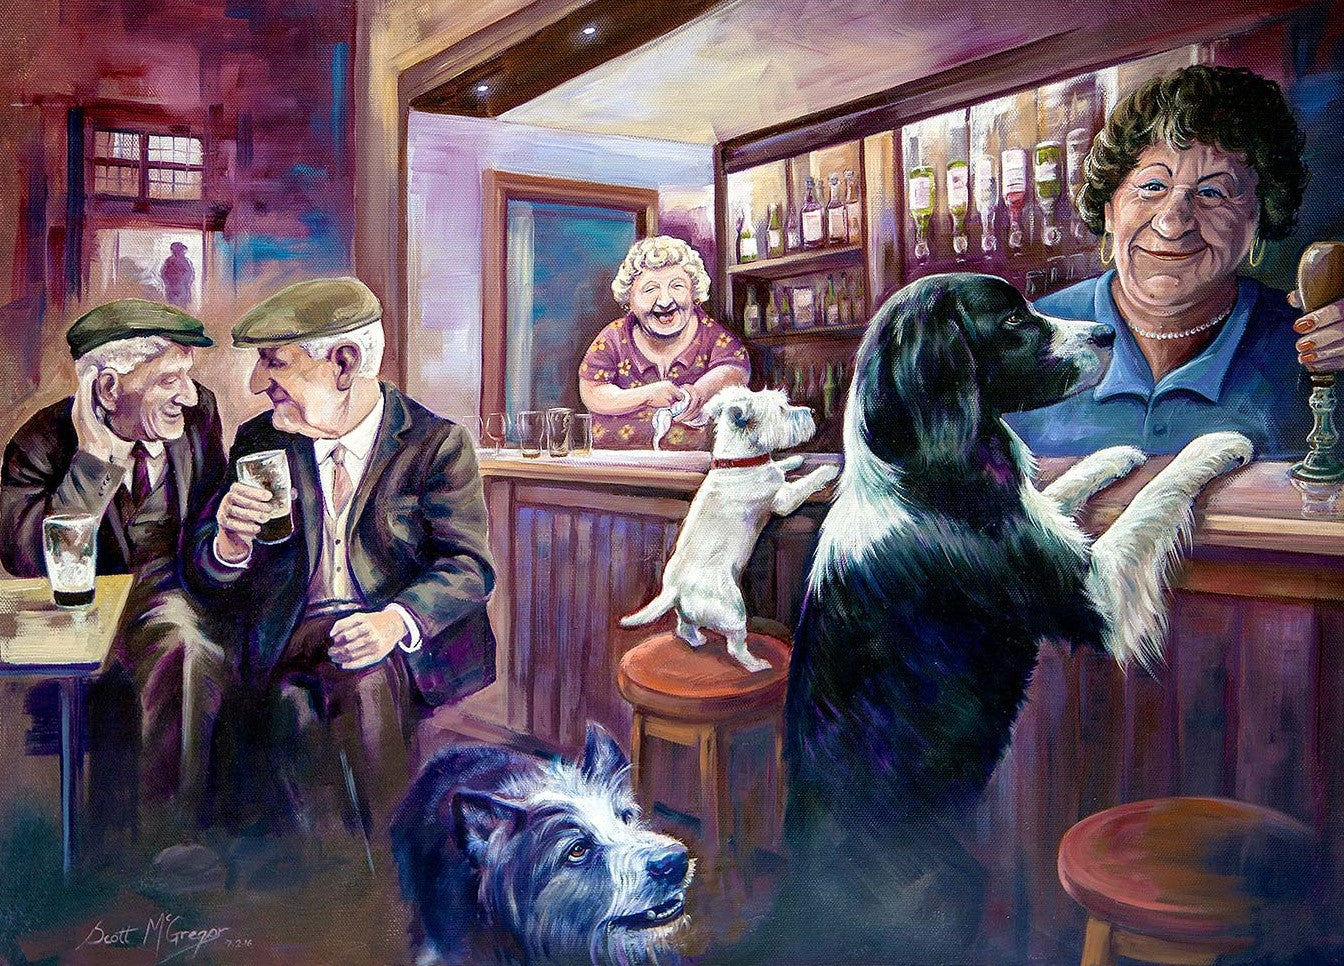 Needing the Hair of the Dog by Scott McGregor